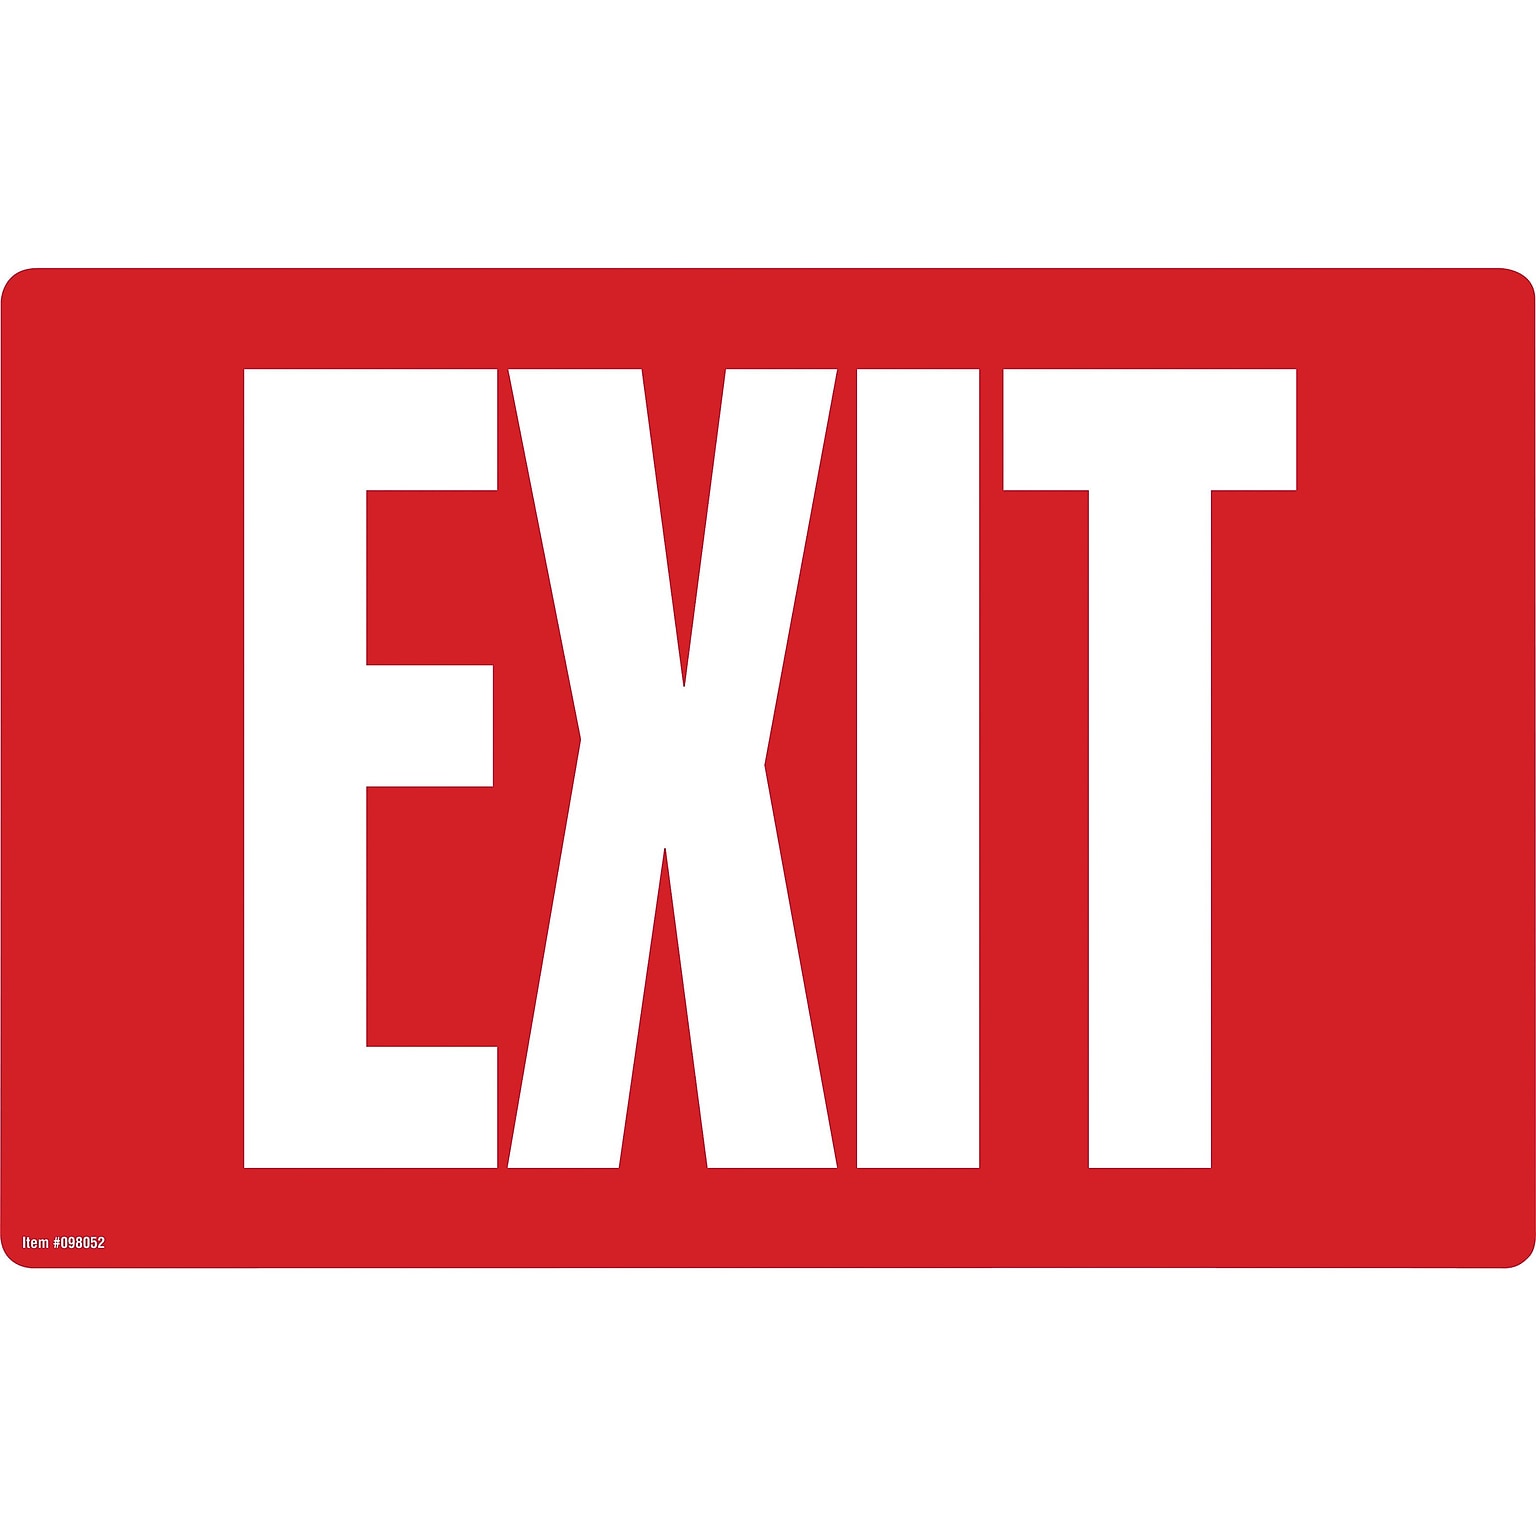 Cosco Exit Indoor Wall Sign, 12L x 8H, Red/White (098052)